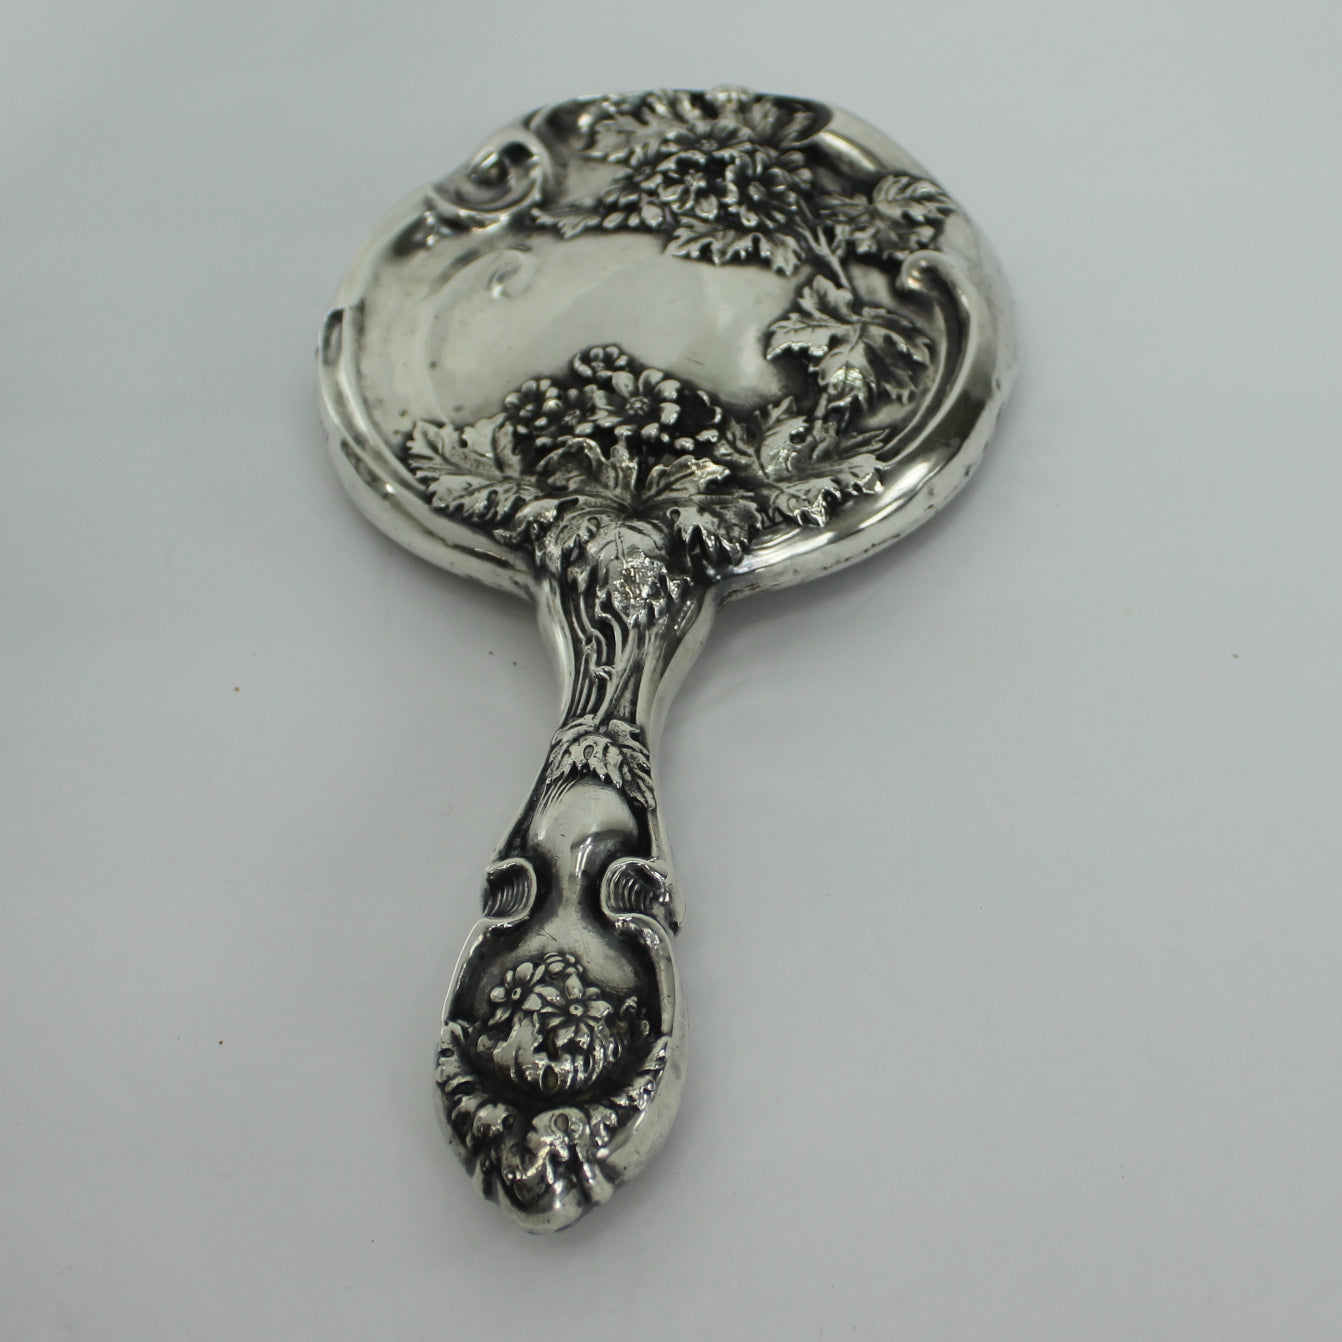 Antique Sterling Silver Hand Mirror Victorian Vanity Floral Art Nouveau Repousse view from handle of dimensional pattern